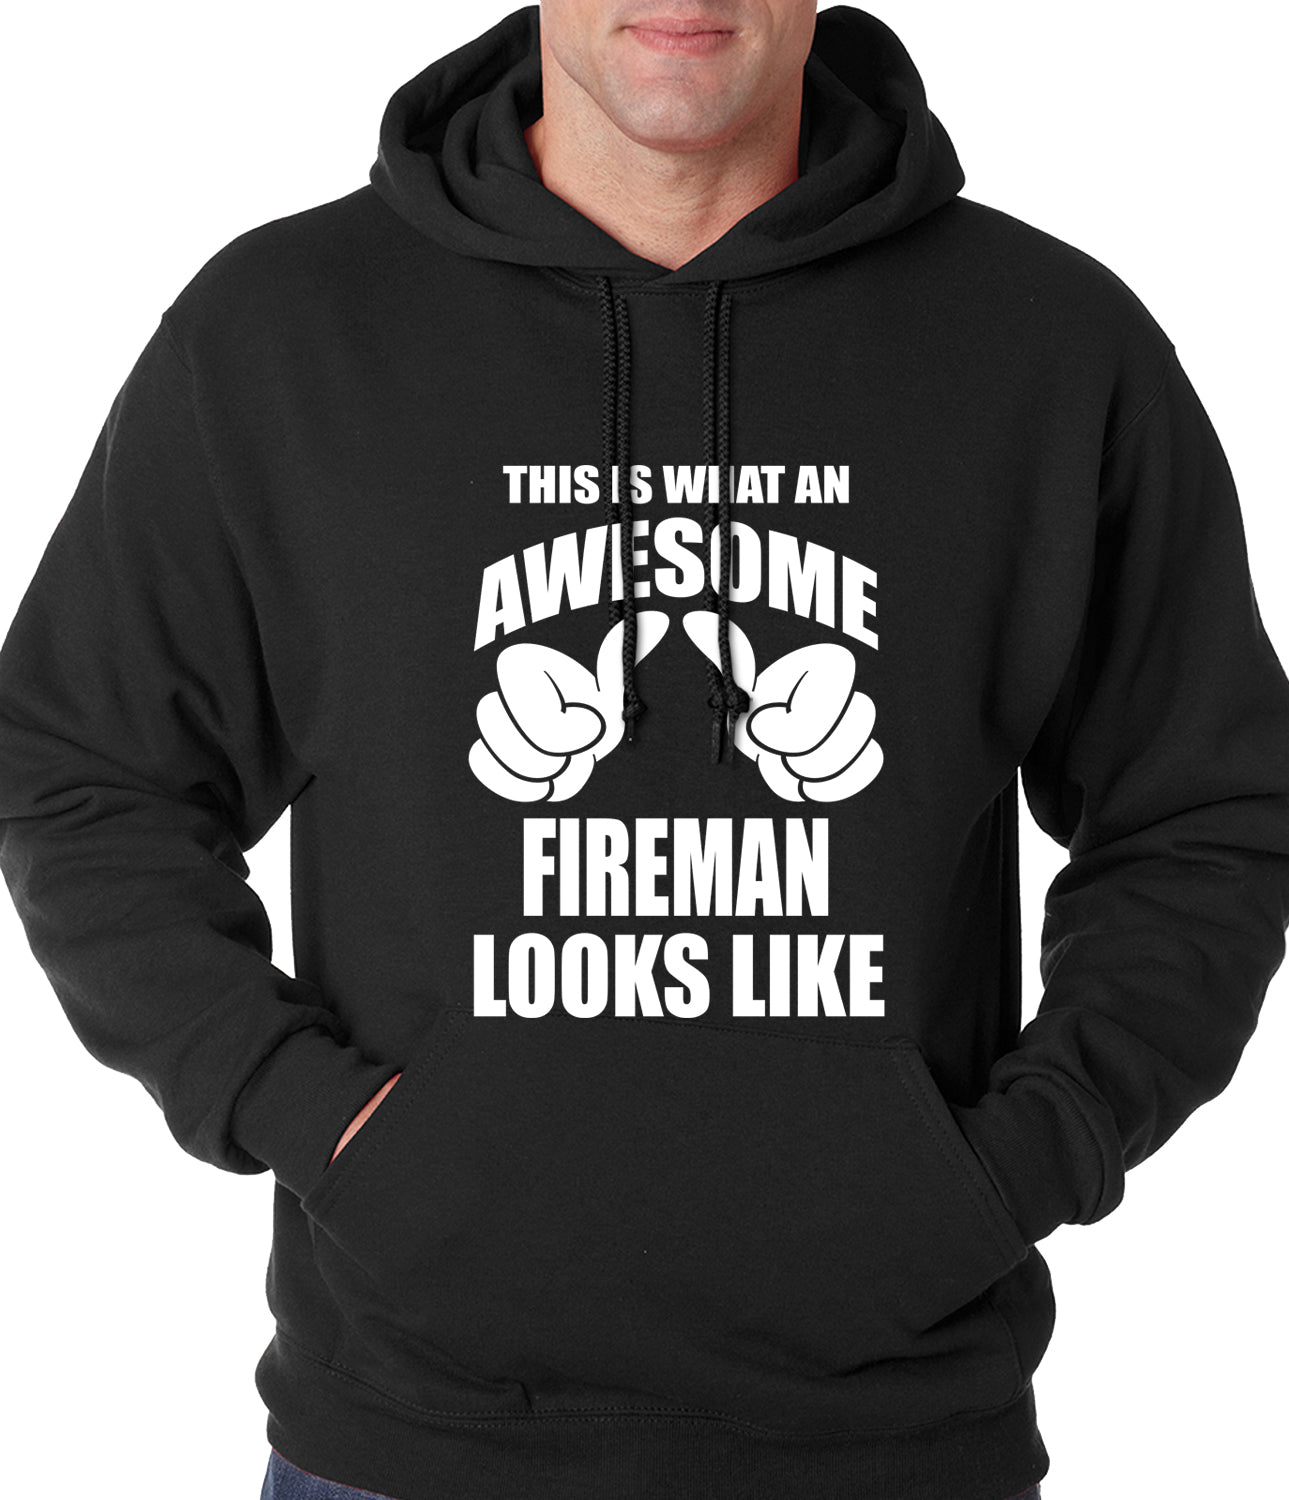 This Is What An Awesome Fireman Looks Like Adult Hoodie